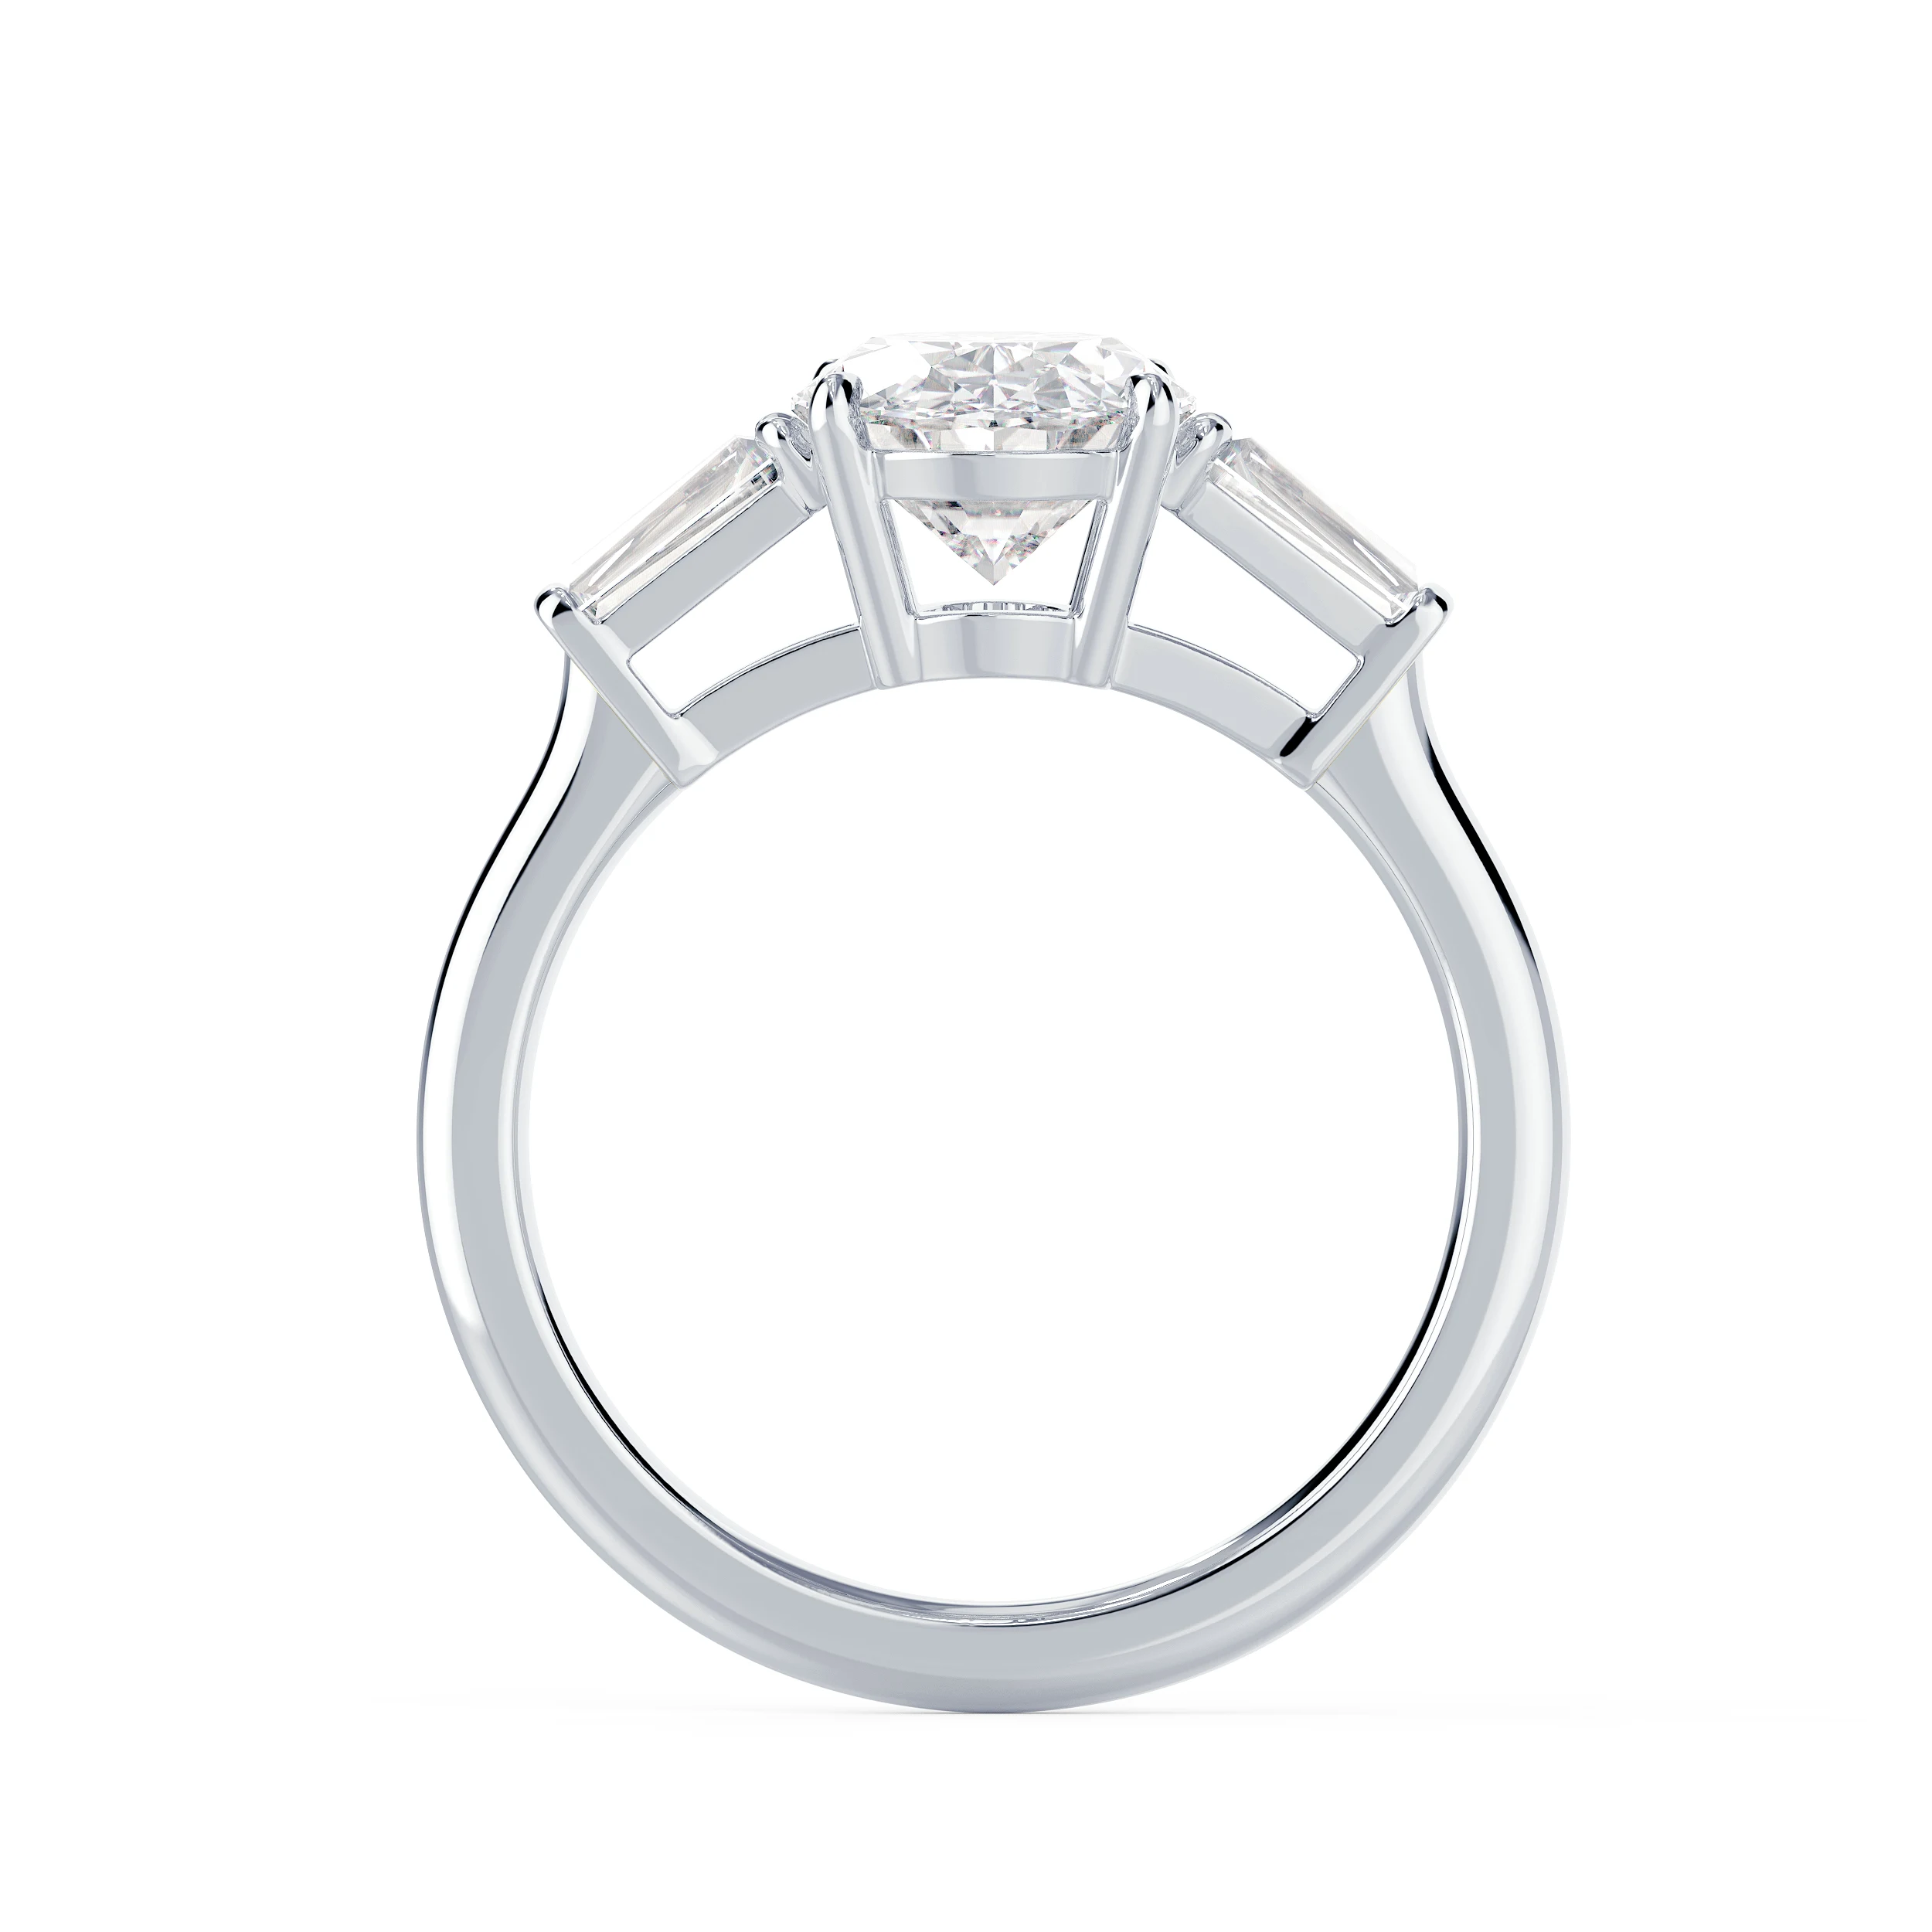 Man Made Diamonds set in White Gold Oval and Baguette Setting (Profile View)